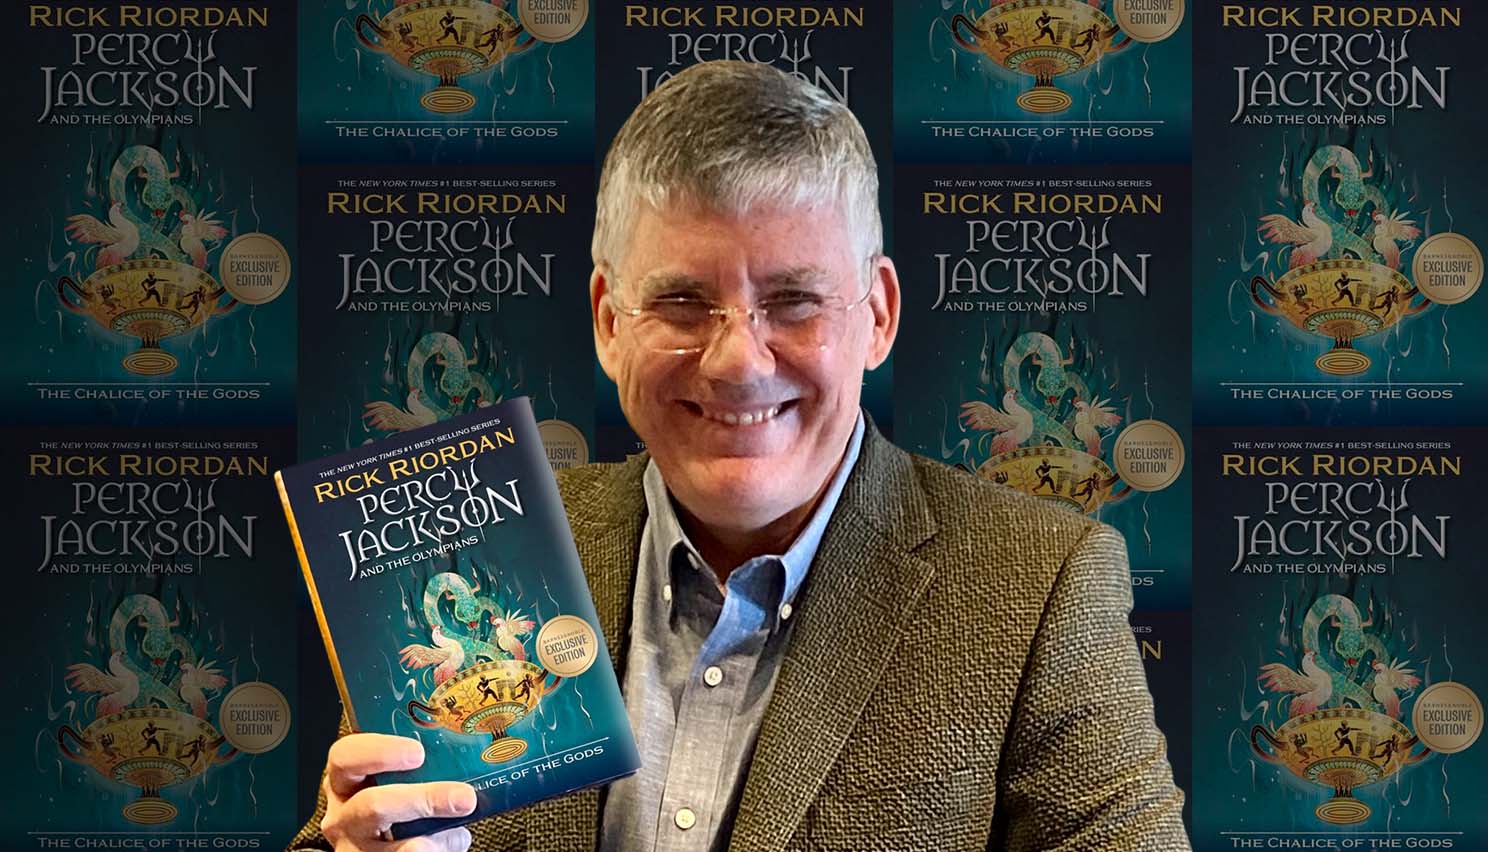 The Chalice of the Gods Percy Jackson and the Olympians by Rick